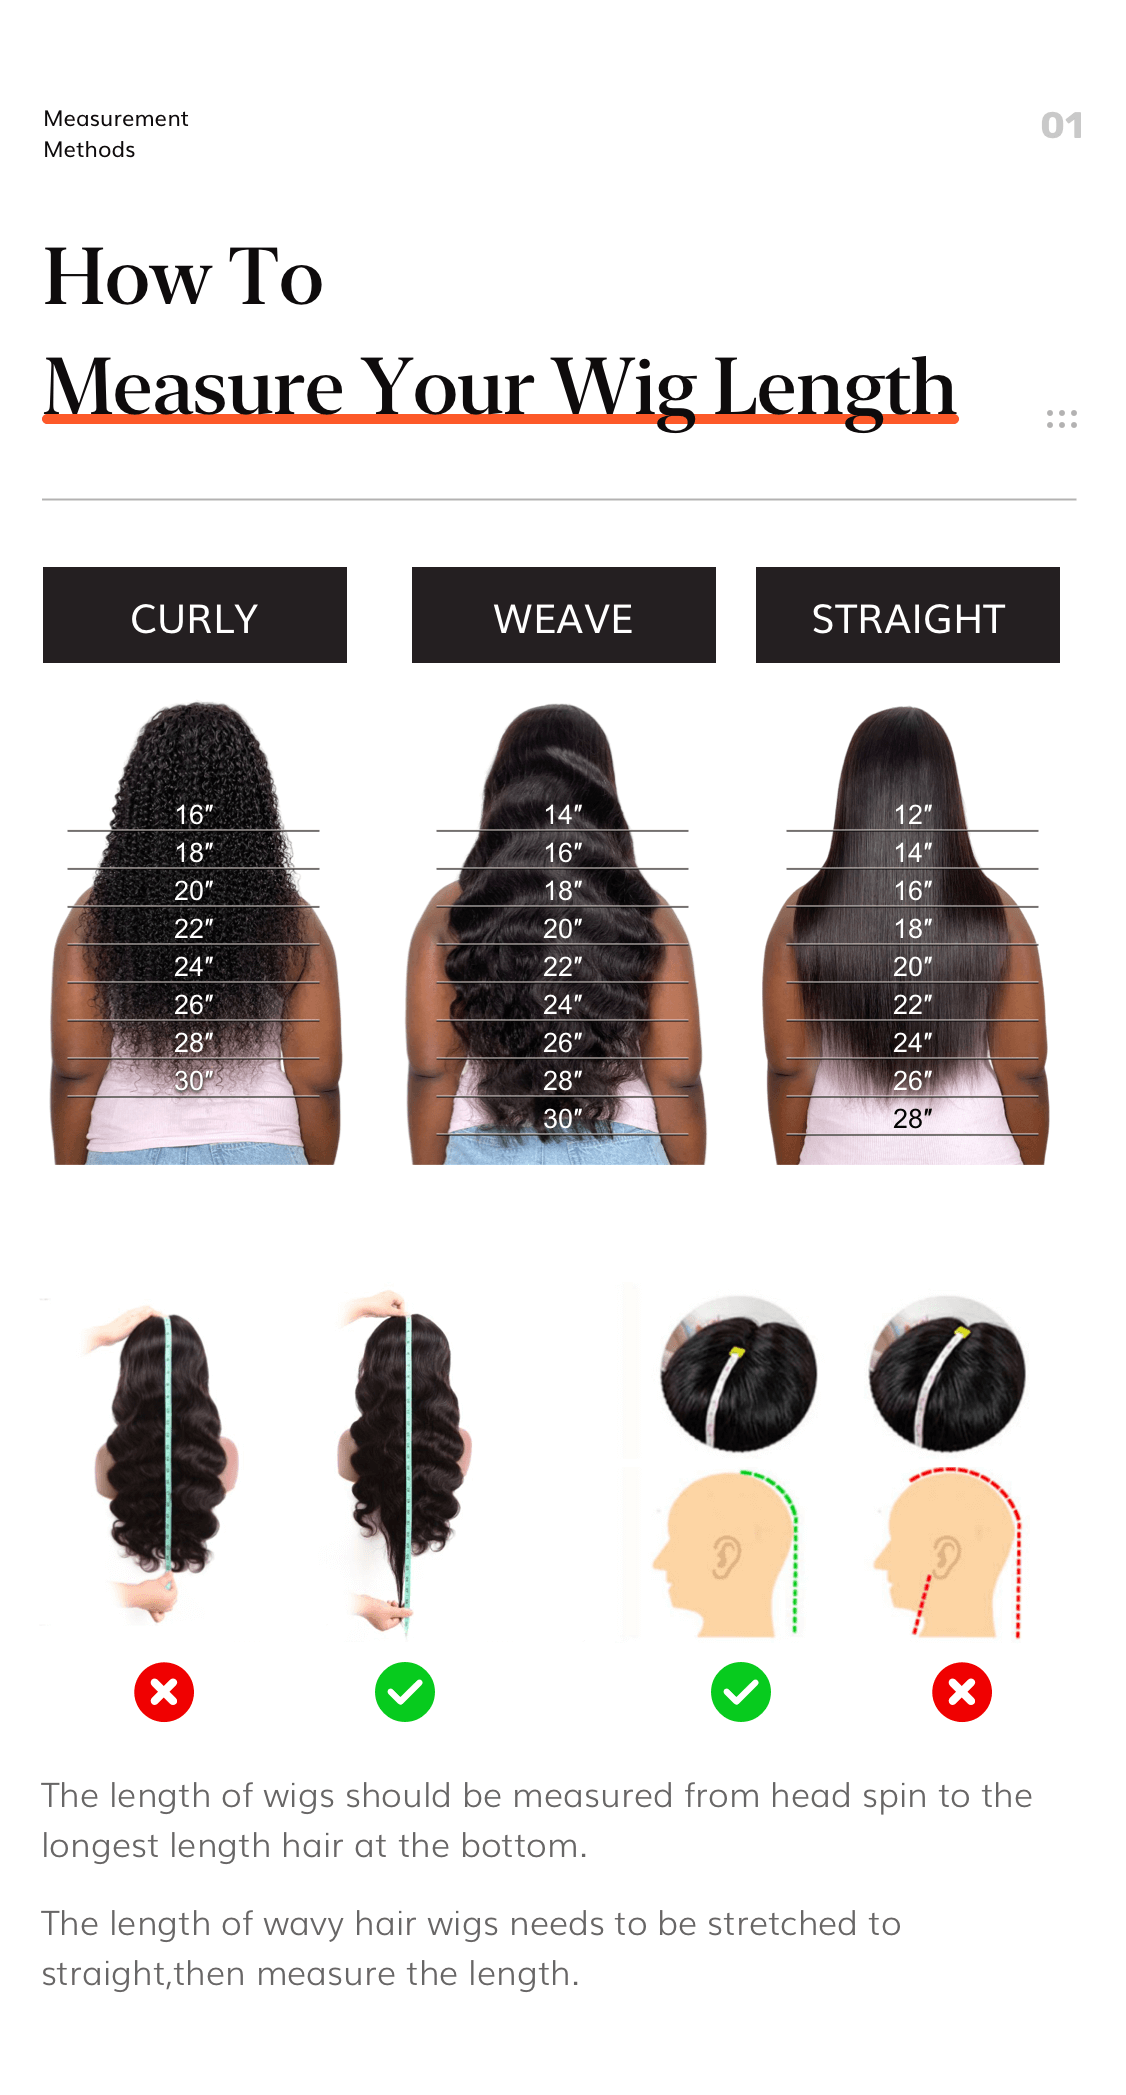 how to measture wig length